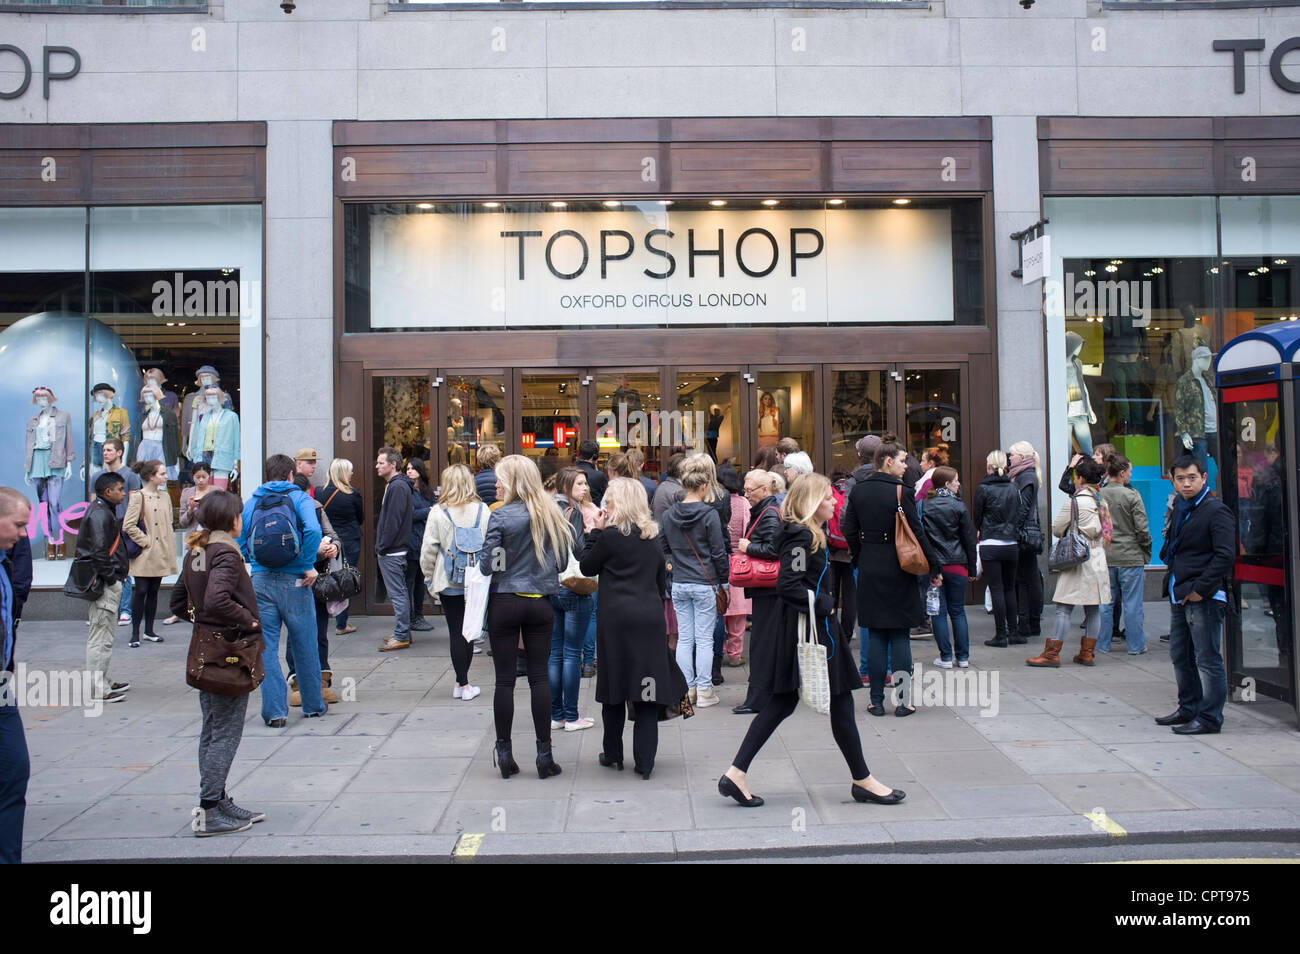 Topshop store in London's Oxford Street shopping area. Shoppers are waiting  for the store to open on a Sunday morning at 11am Stock Photo - Alamy